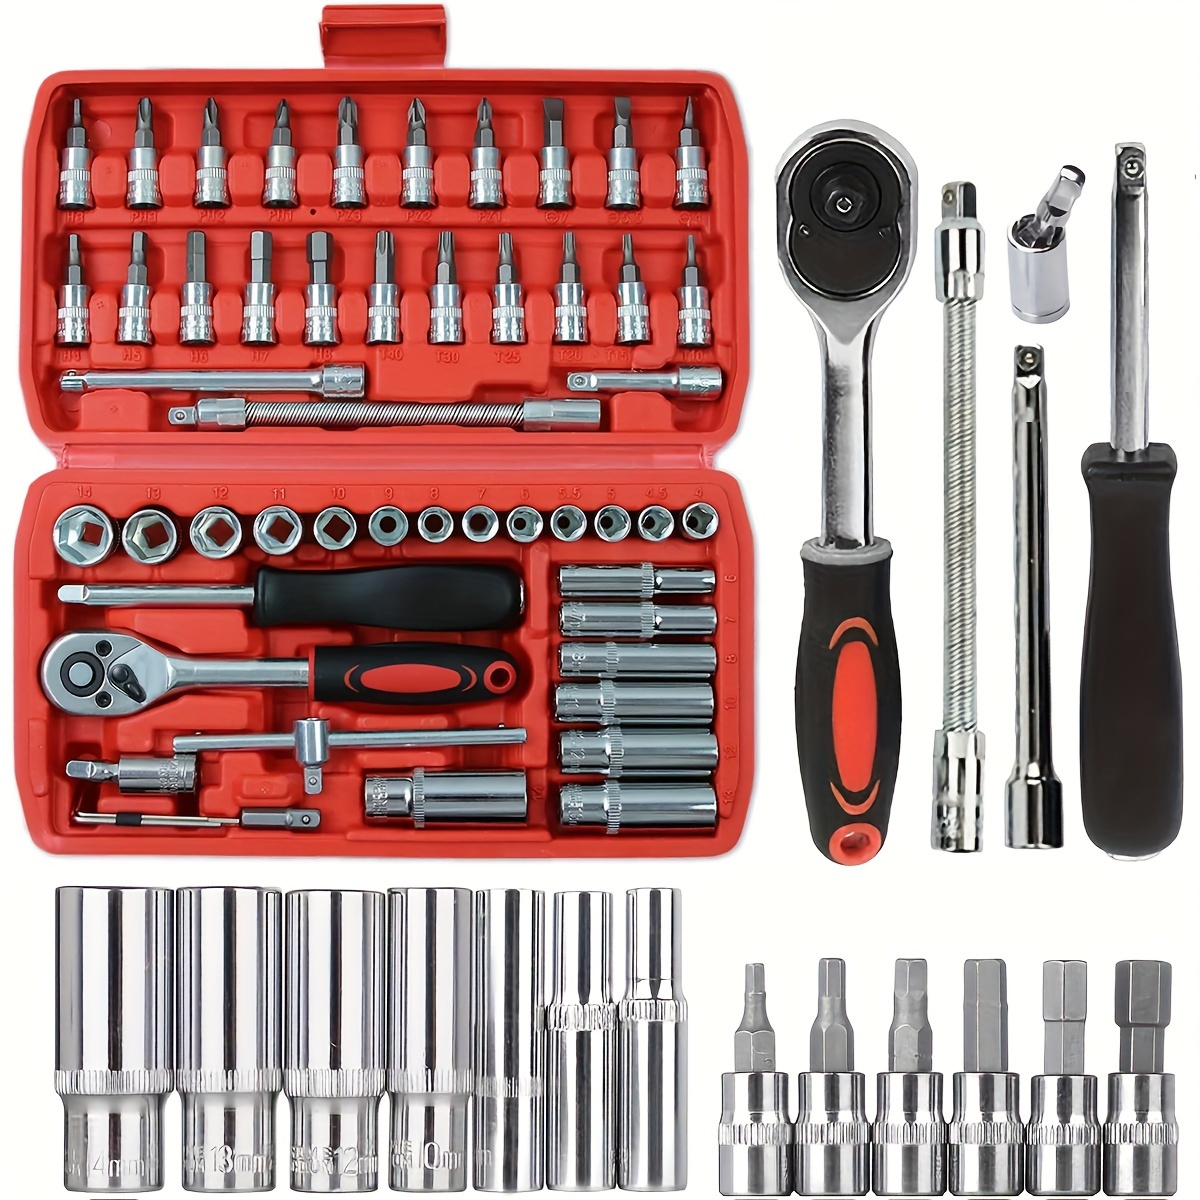 

53-piece 1/4" Drive Chrome Vanadium Steel Socket Set With Ratchet Wrench, Bit Sockets, Extension Bars - Mechanical Operation For Auto, Bike Repair & Home Maintenance - Includes Storage Case